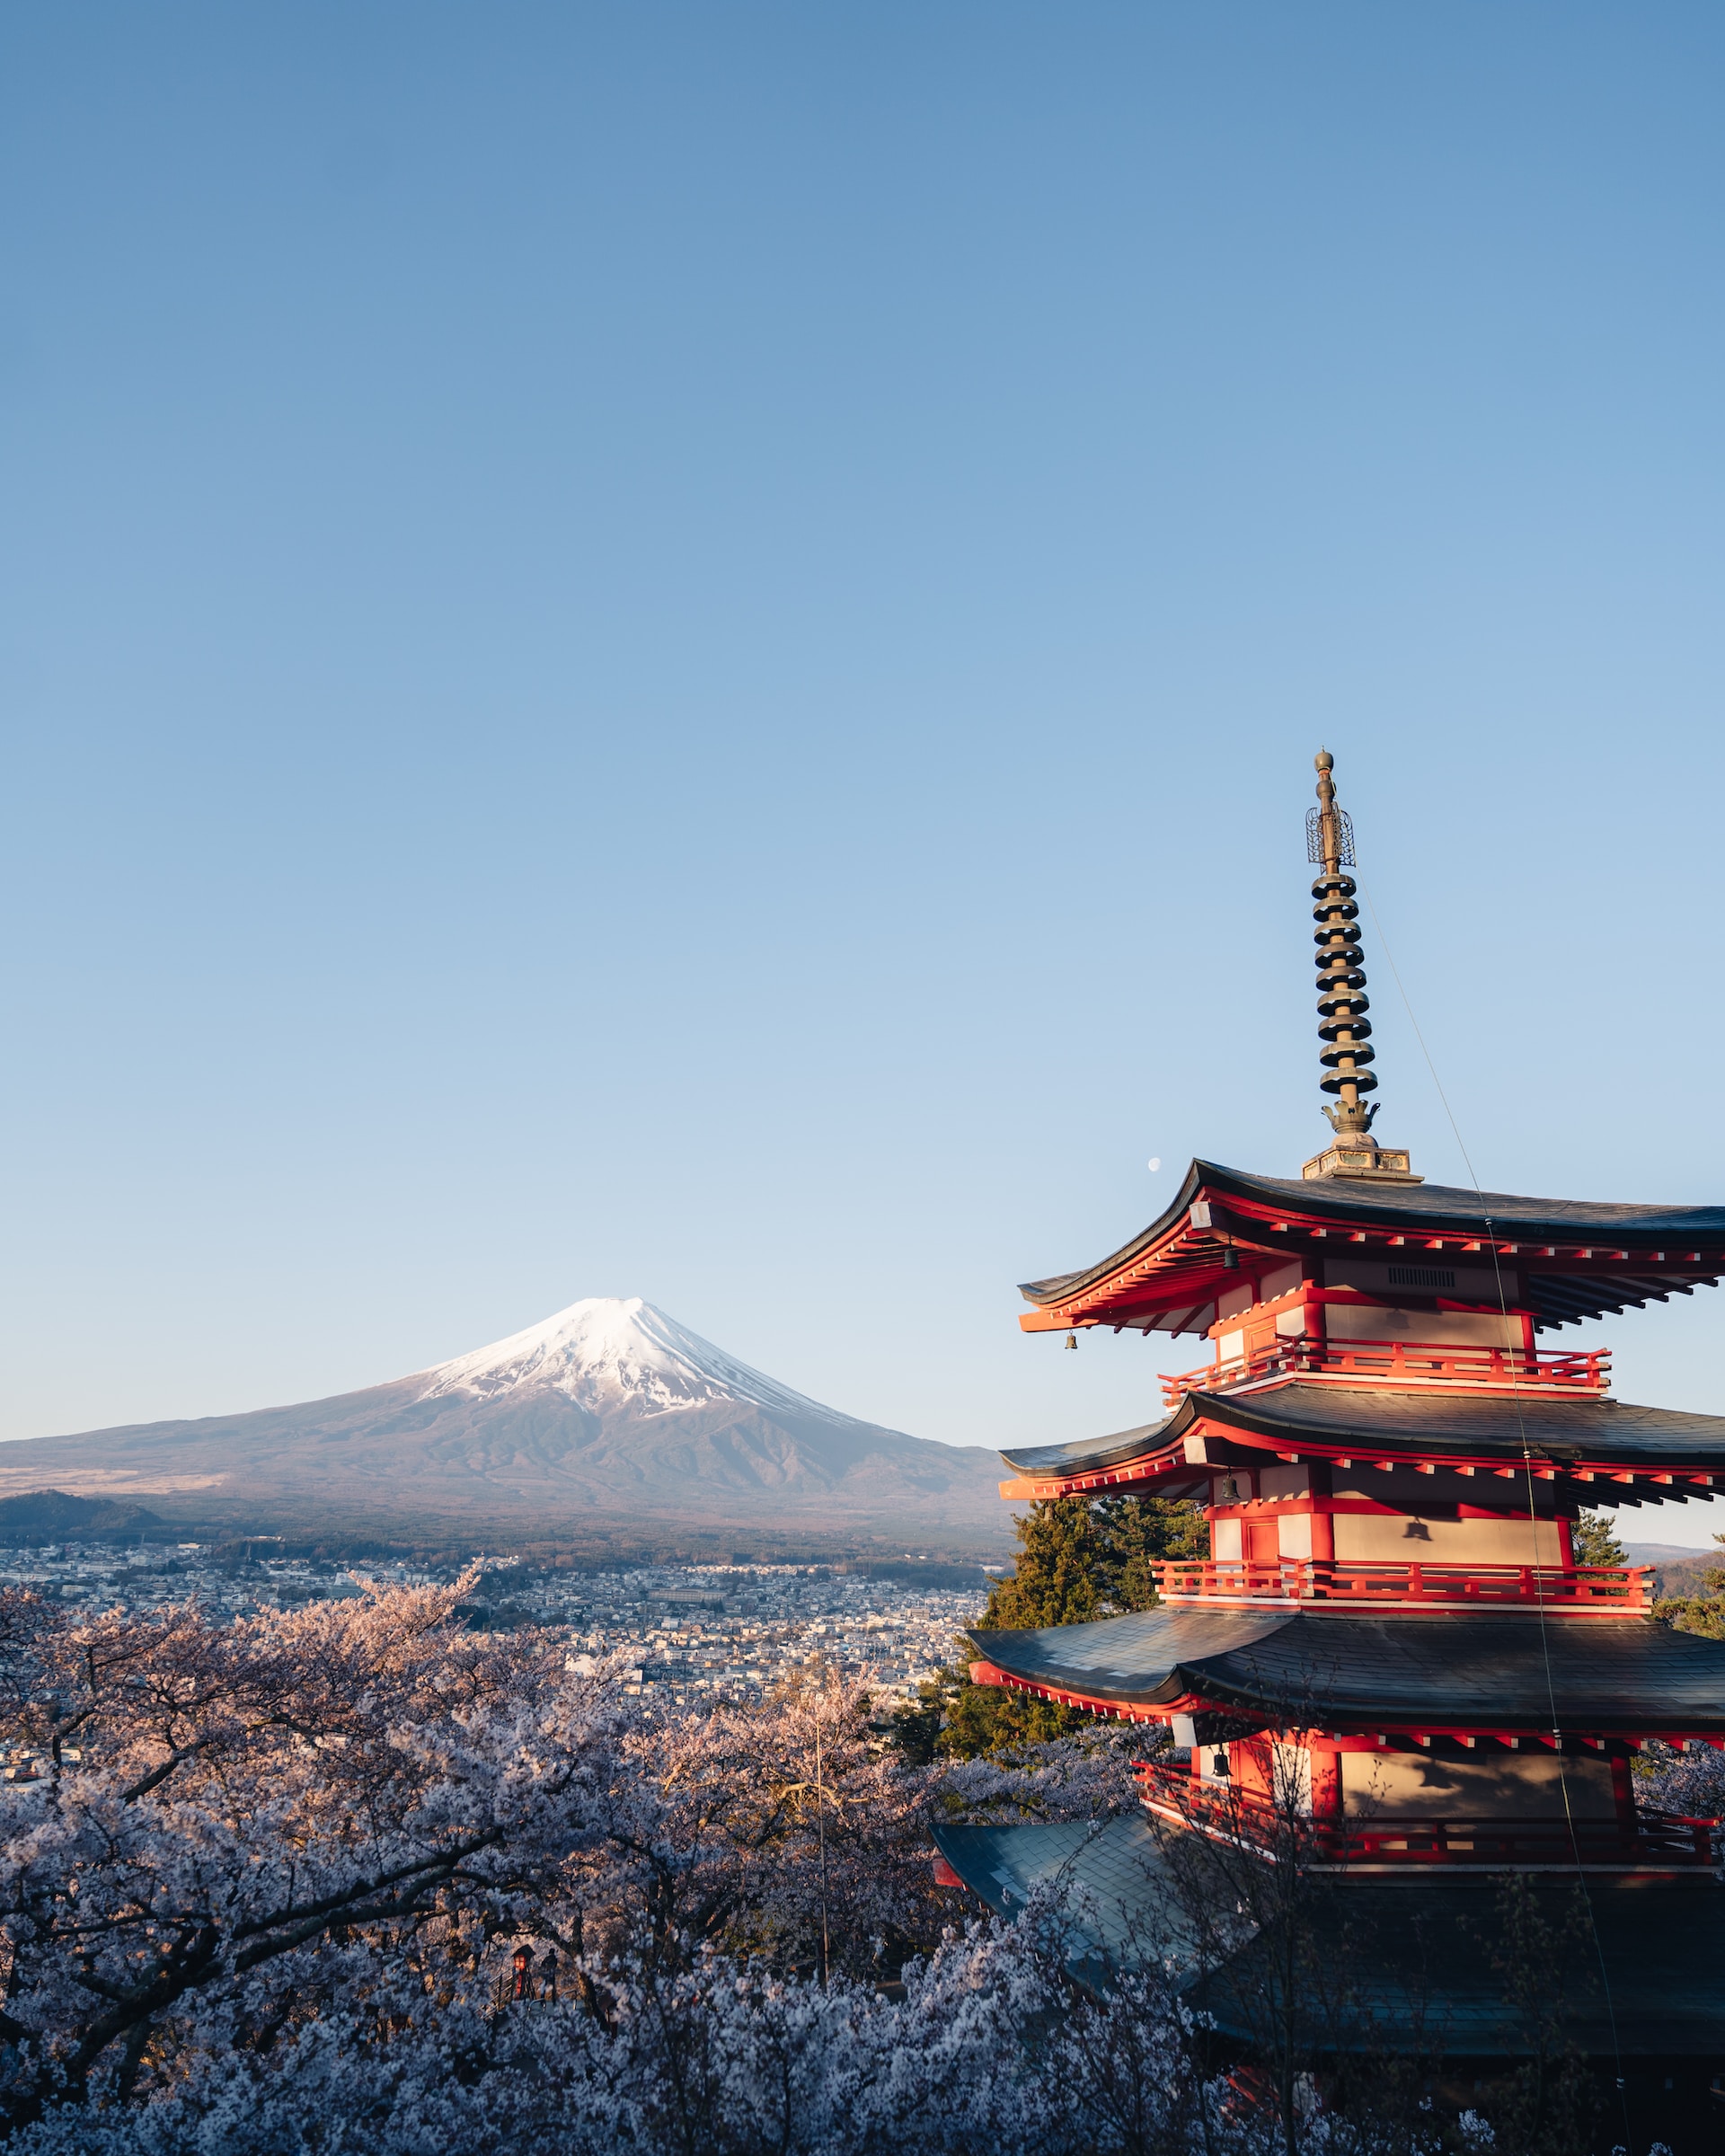 4 easy ways on How to Get to the Magnificent Chureito Pagoda To see mt fuji